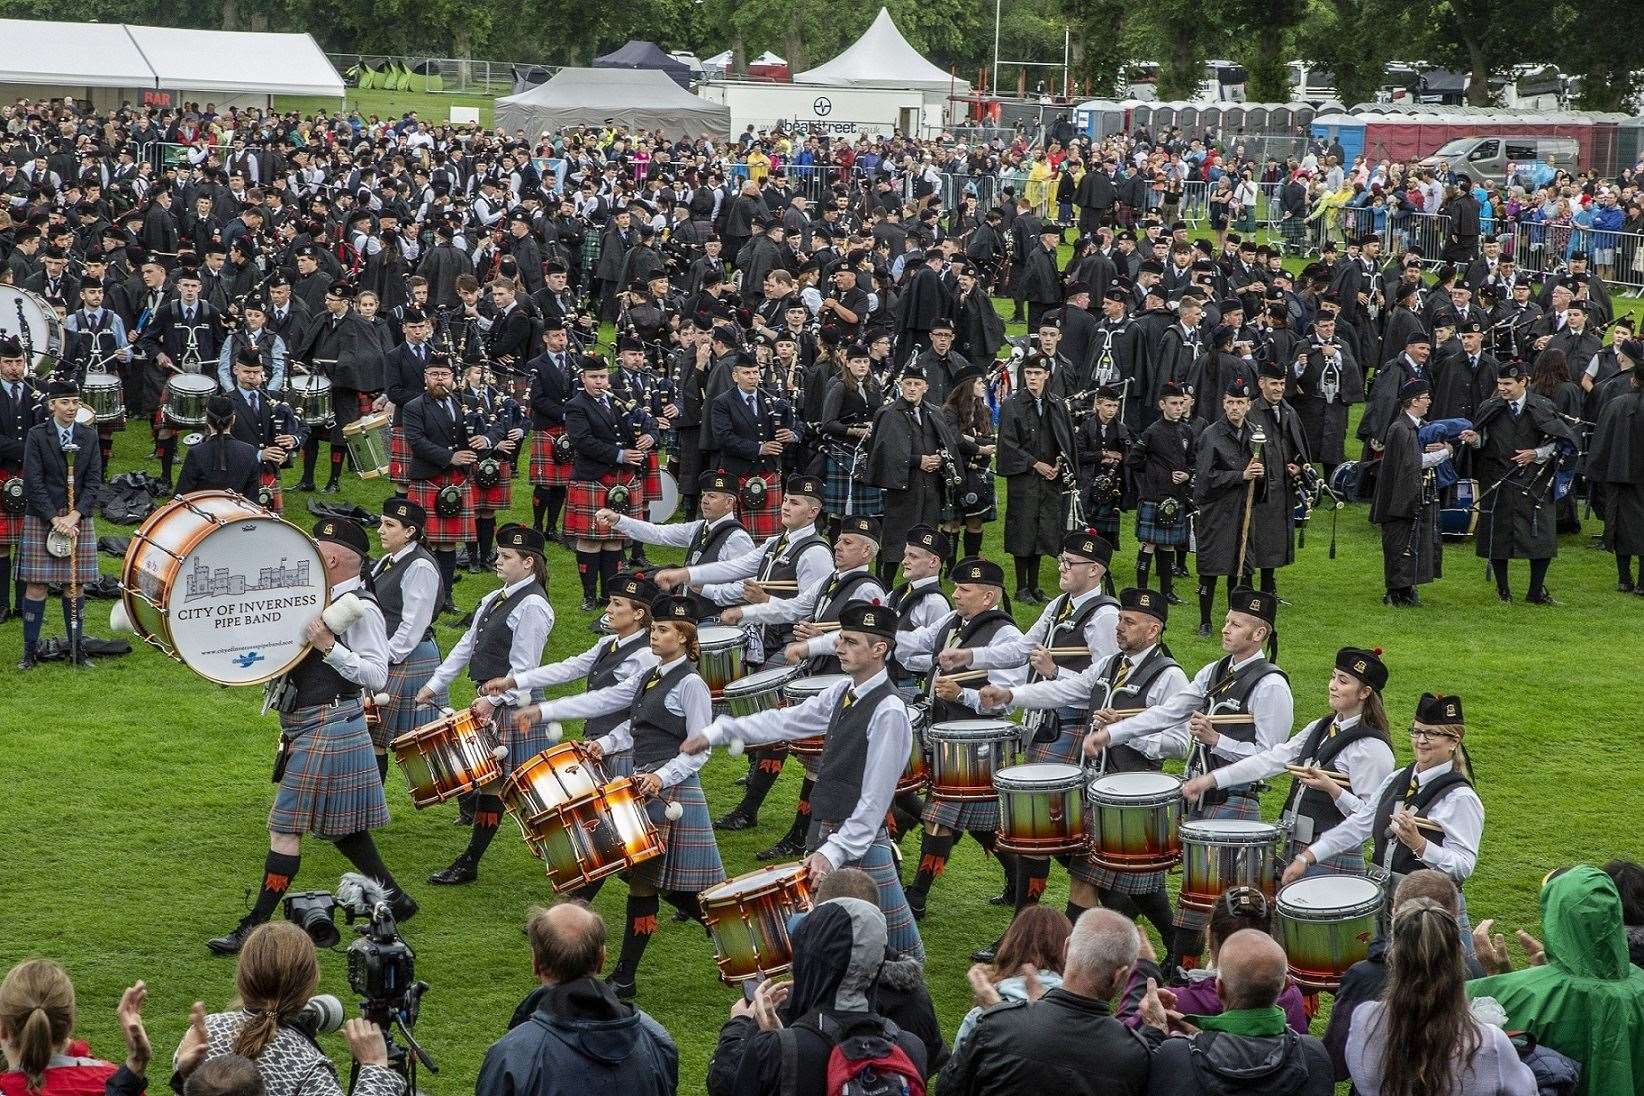 The European Pipe Band Championships took place in Bught Park, Inverness in June 2019.